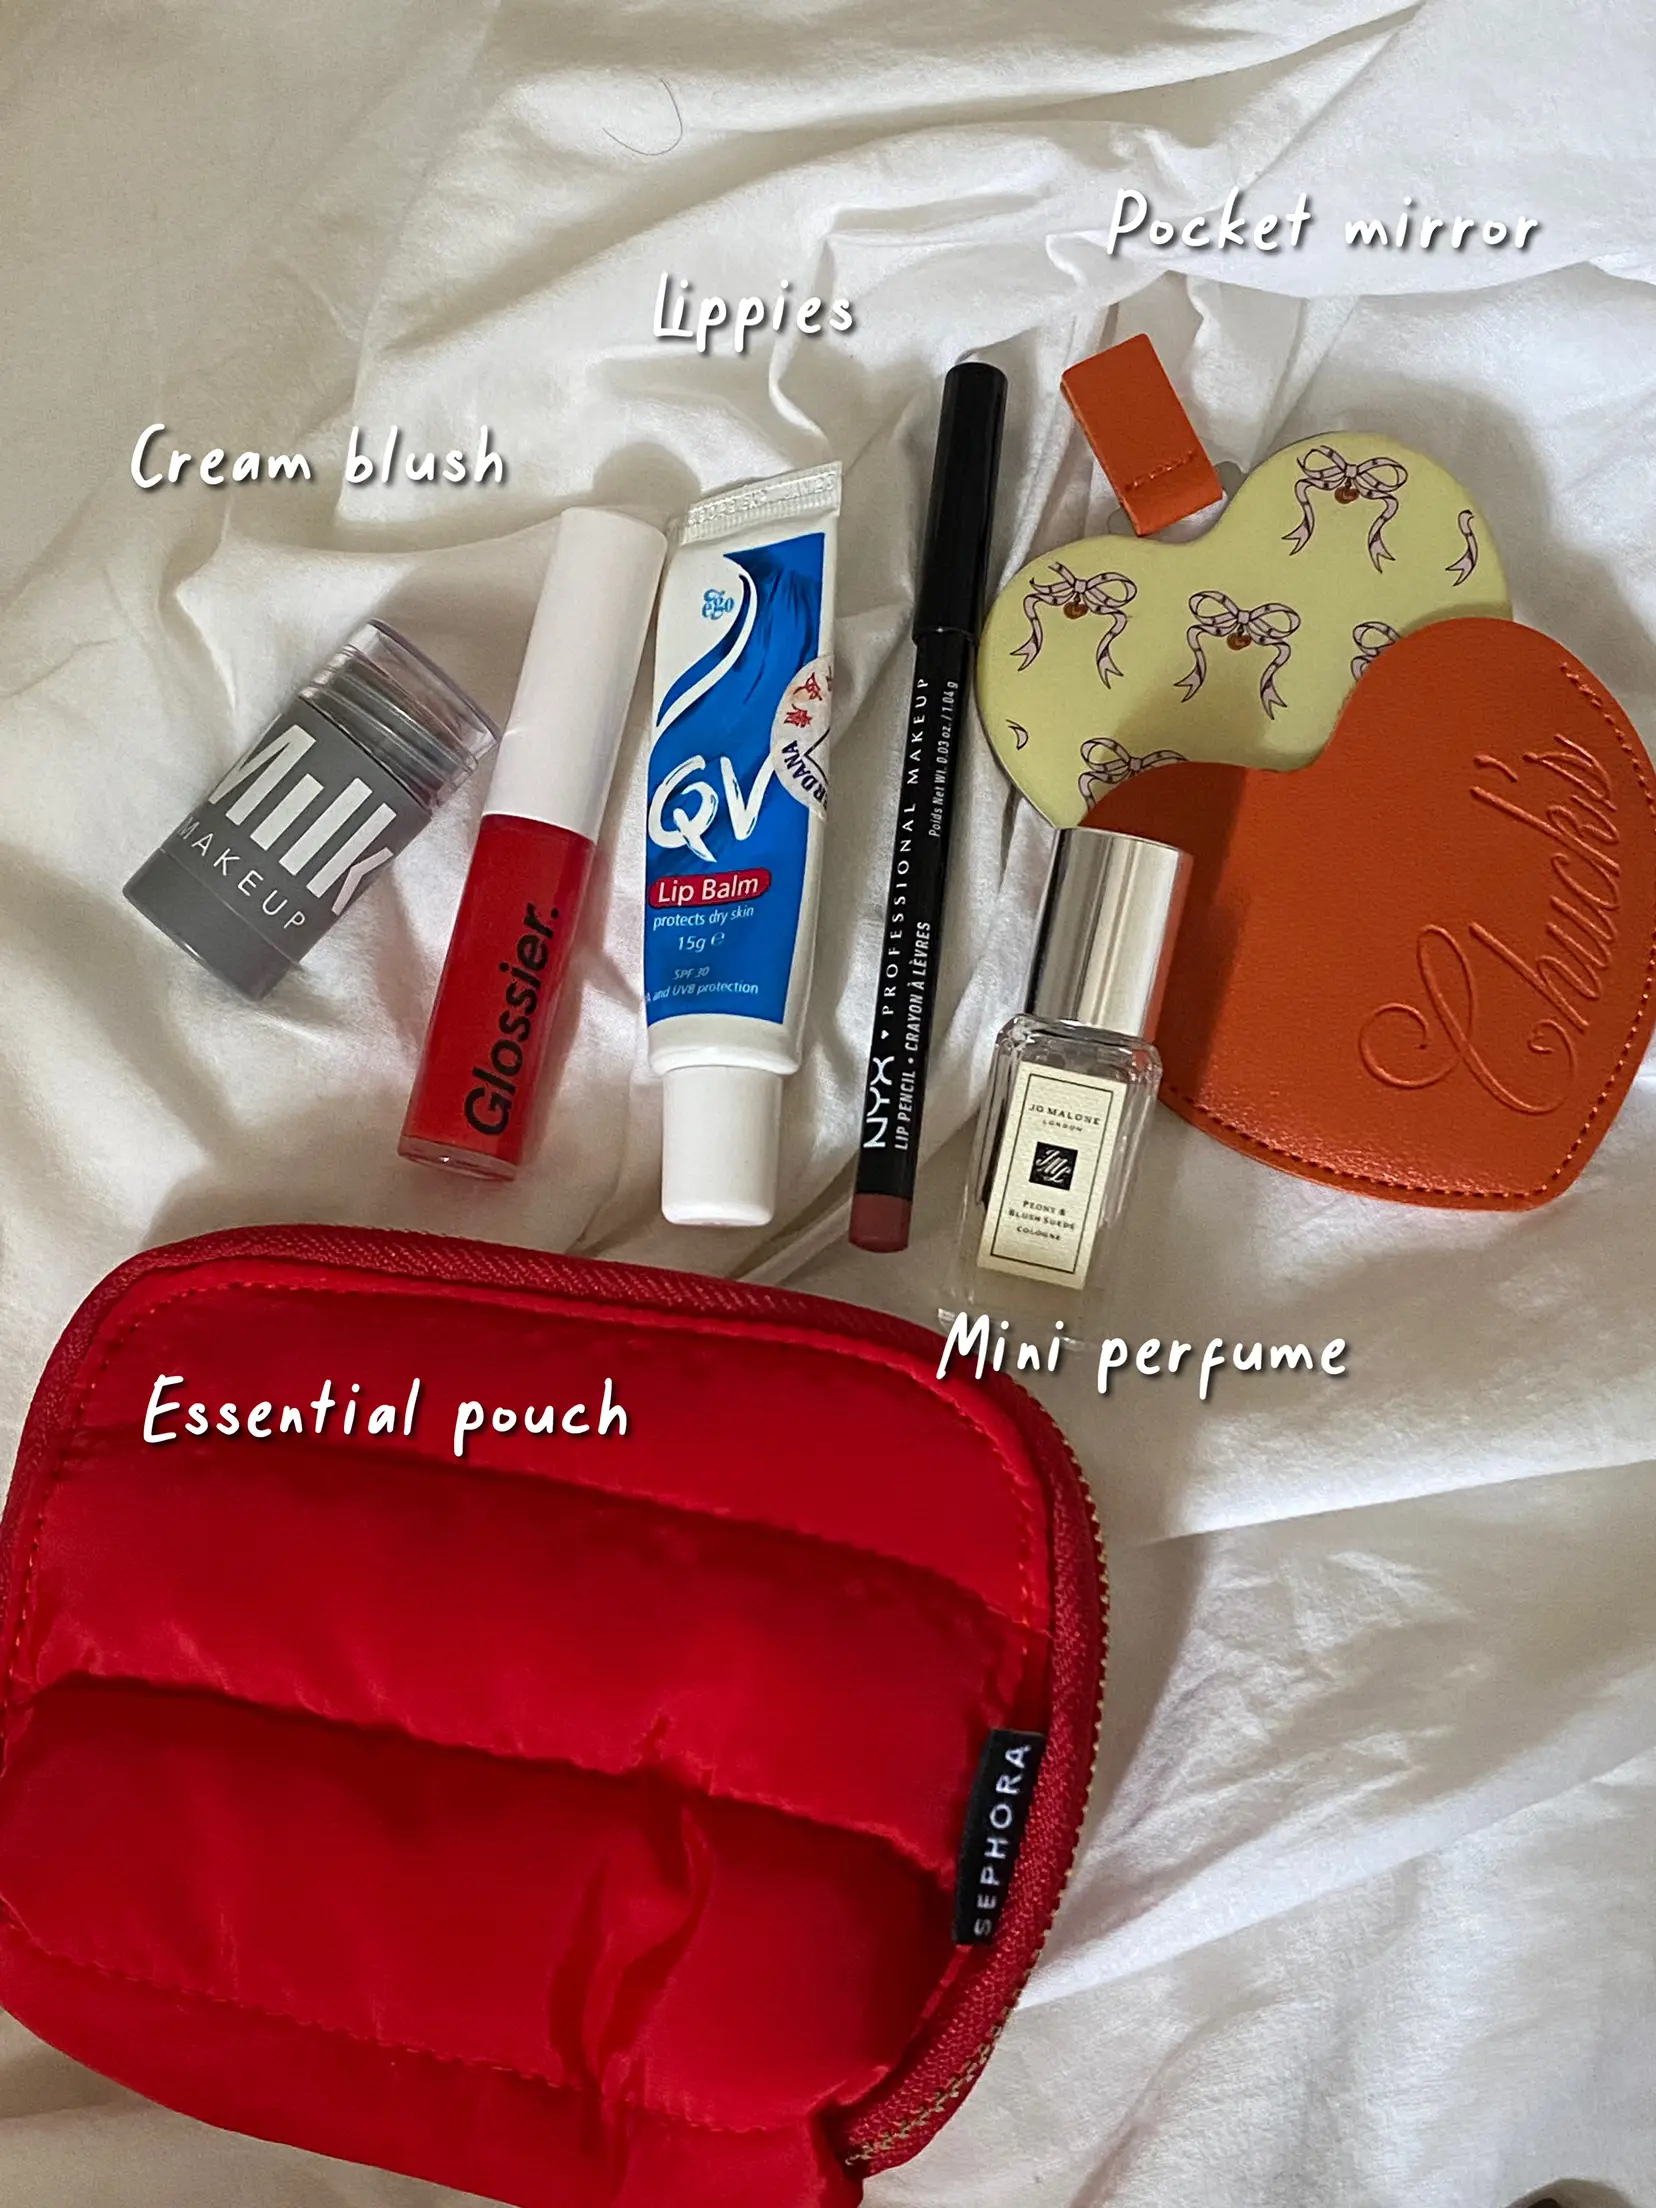 What's in My Longchamp Pouch, Le Pliage Neo Pouch